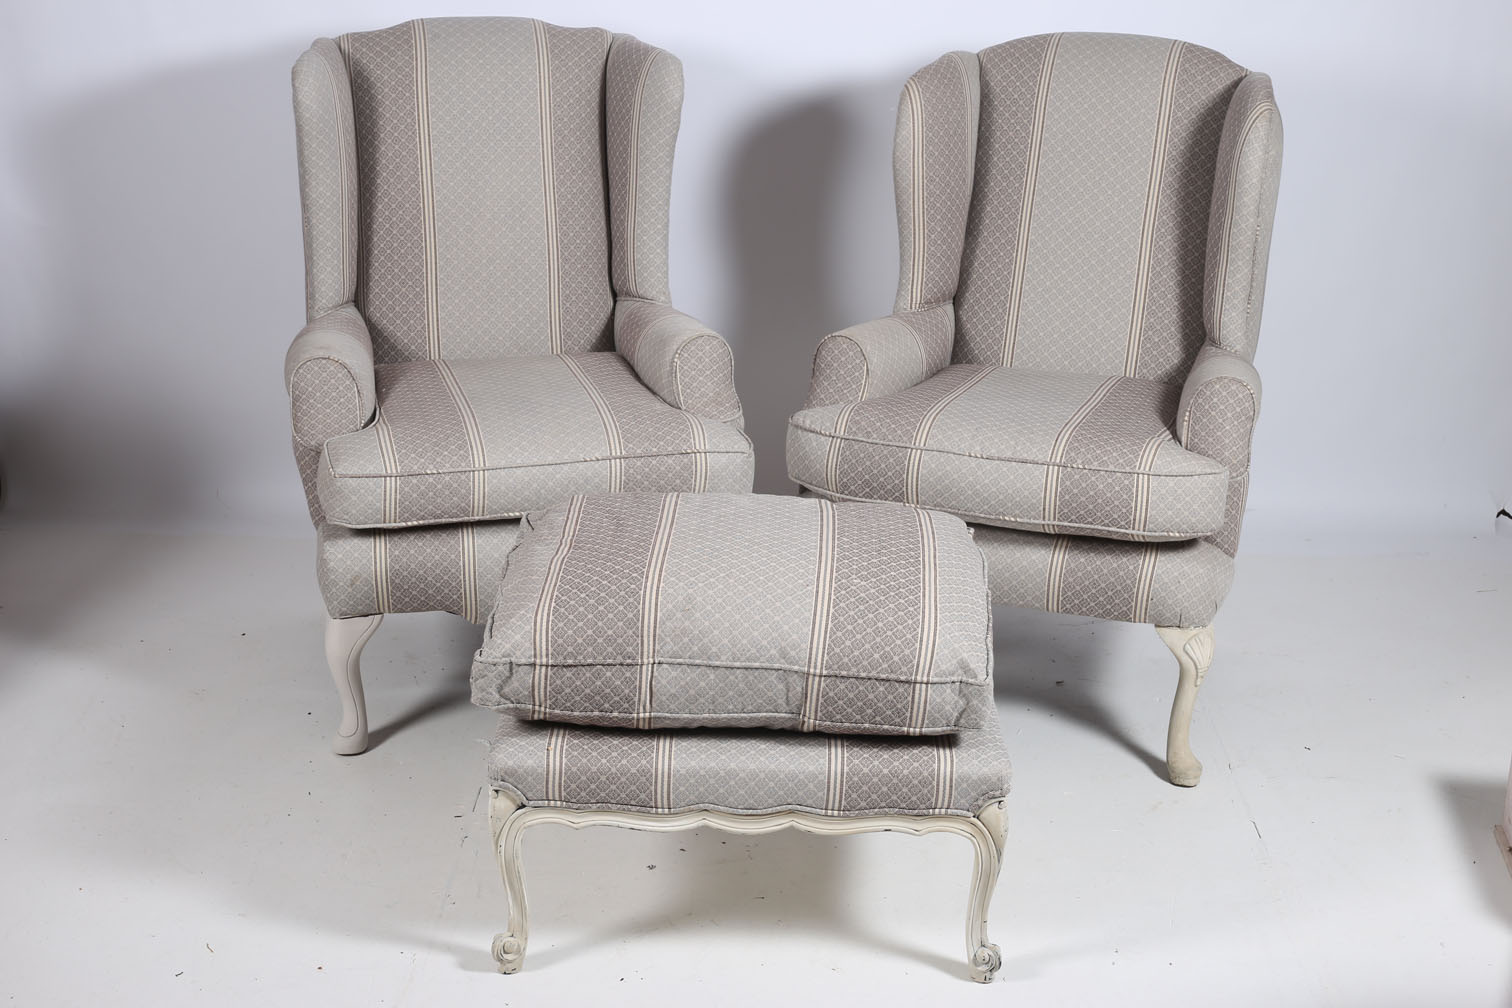 A PAIR OF QUEEN ANNE DESIGN GREY PAINTED AND UPHOLSTERED WING CHAIRS with scroll over arms and loose